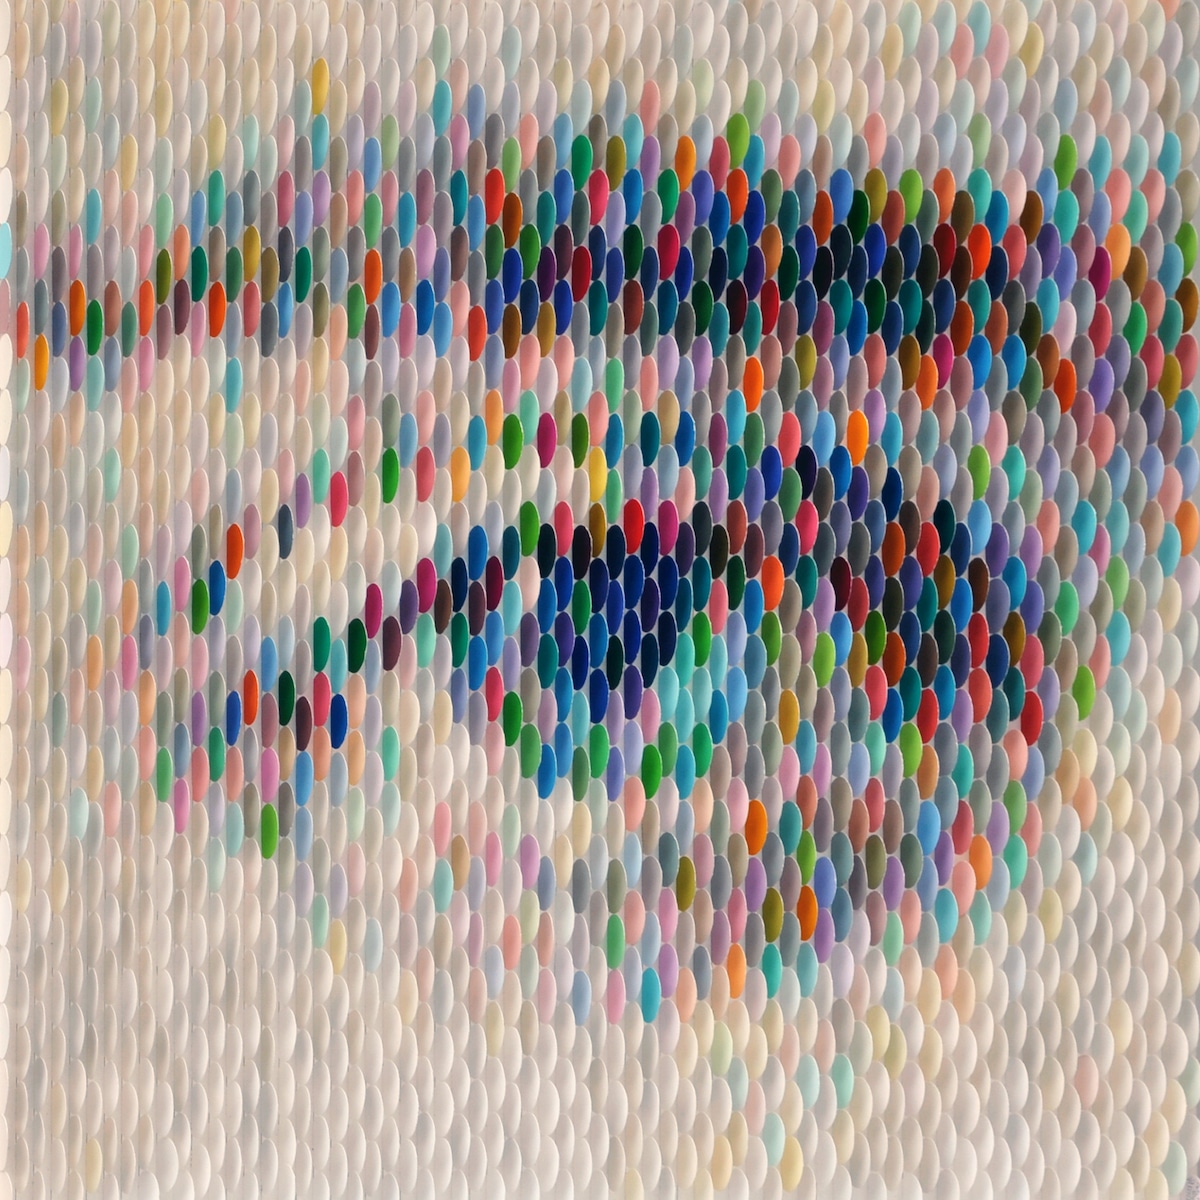 An example of Art Materialism - close up of an eye and eyebrow made with paint swatches by artist Peter Combe